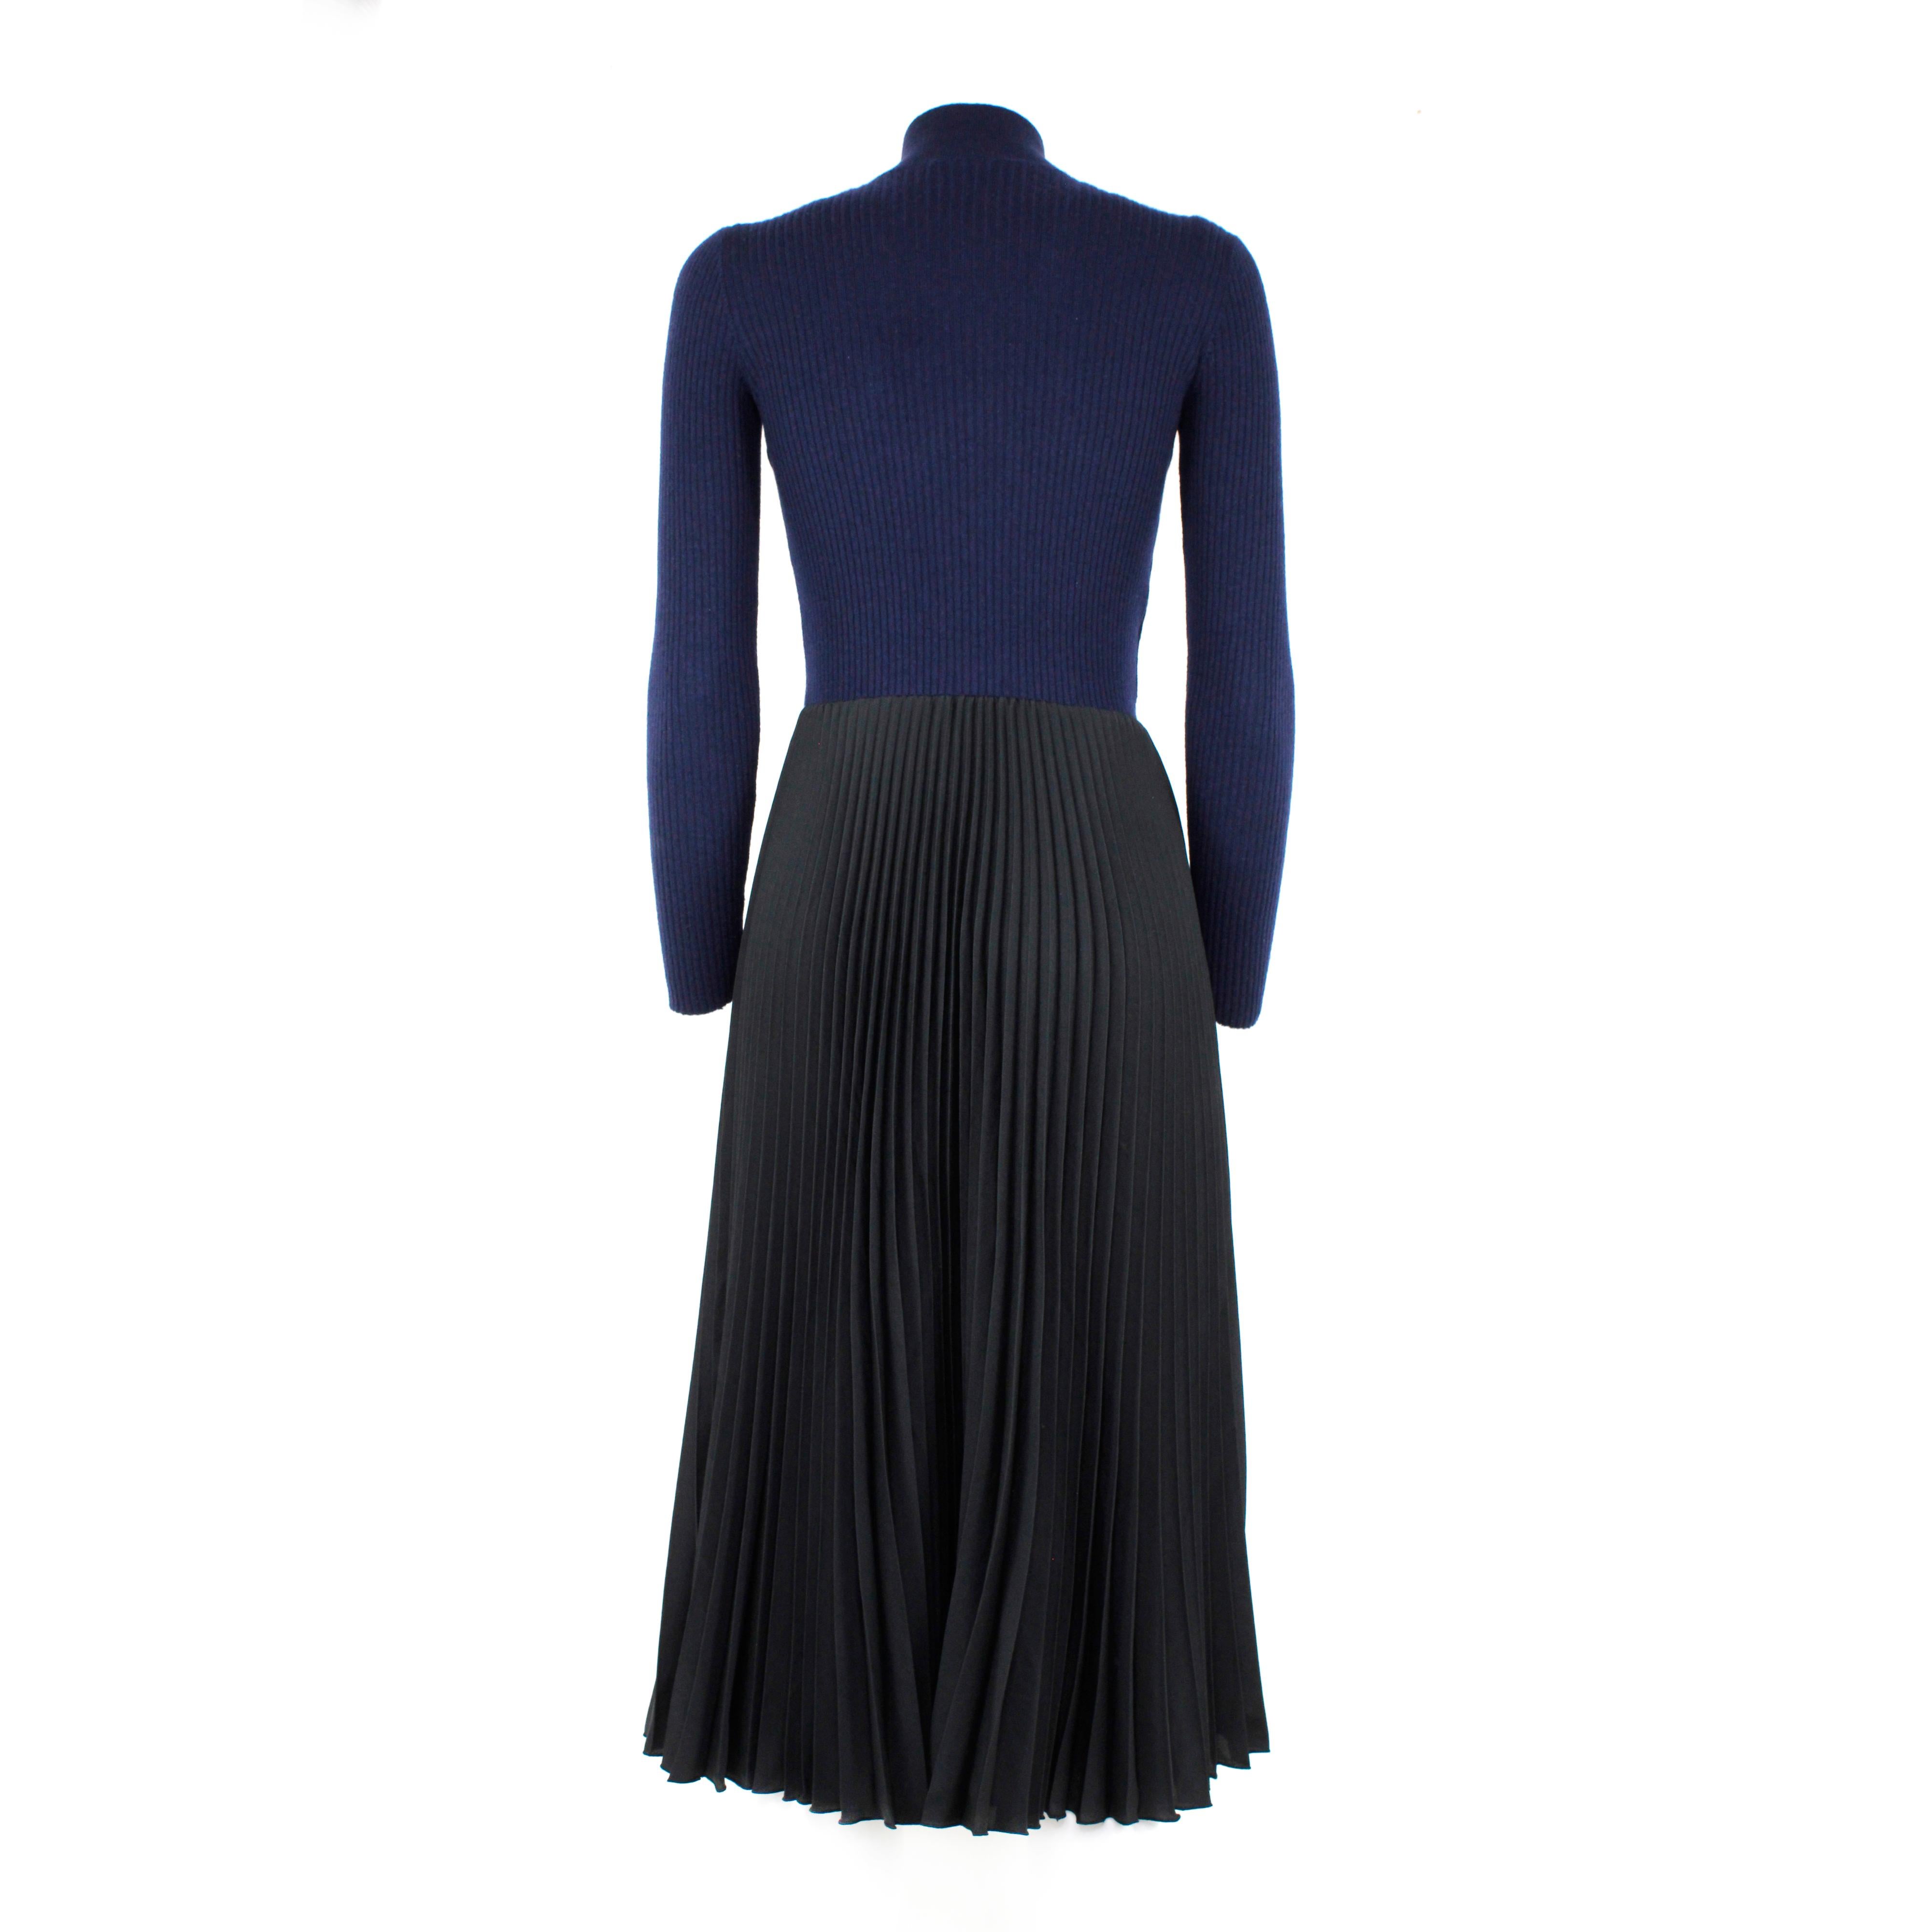 Prada mid-length dress in wool, colour blue and black. Size 38 IT

Condition: 
Excellent.

Packing/accessories:
Hanger.